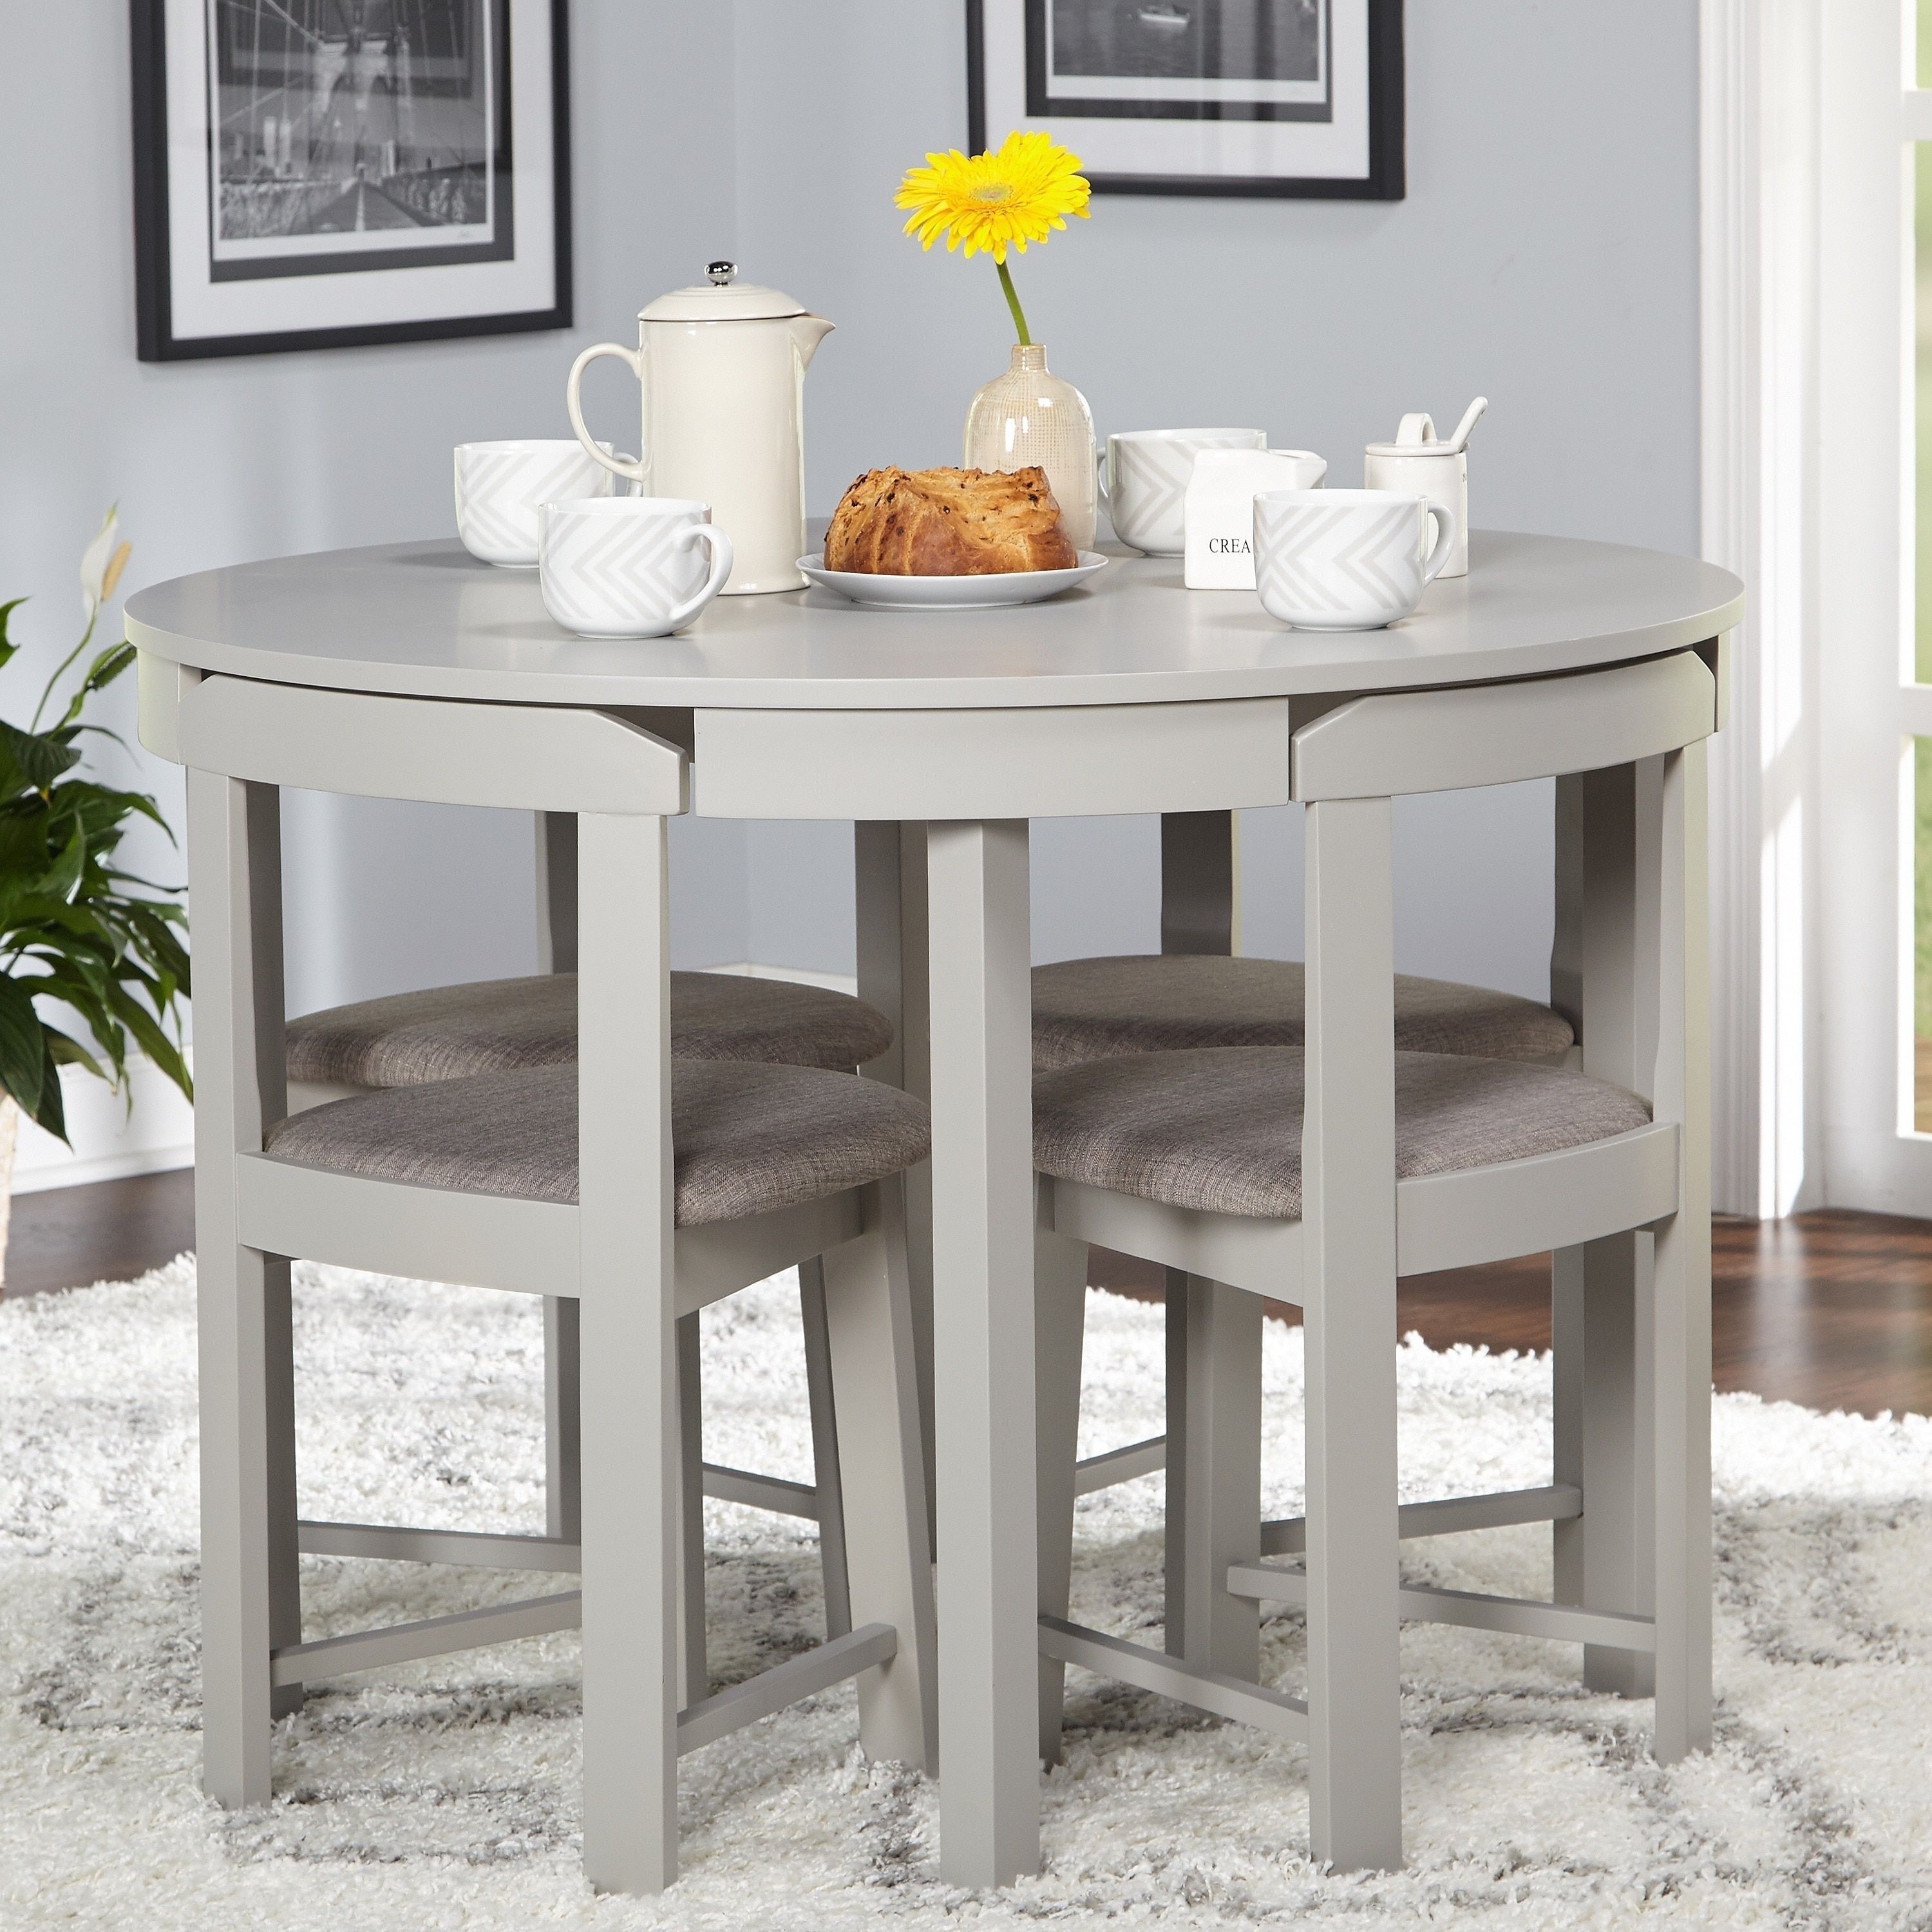 Perfect For Smaller Spaces The 5 Piece Tobey Compact Dining Set Intended For Most Current Lassen 5 Piece Round Dining Sets (View 3 of 20)